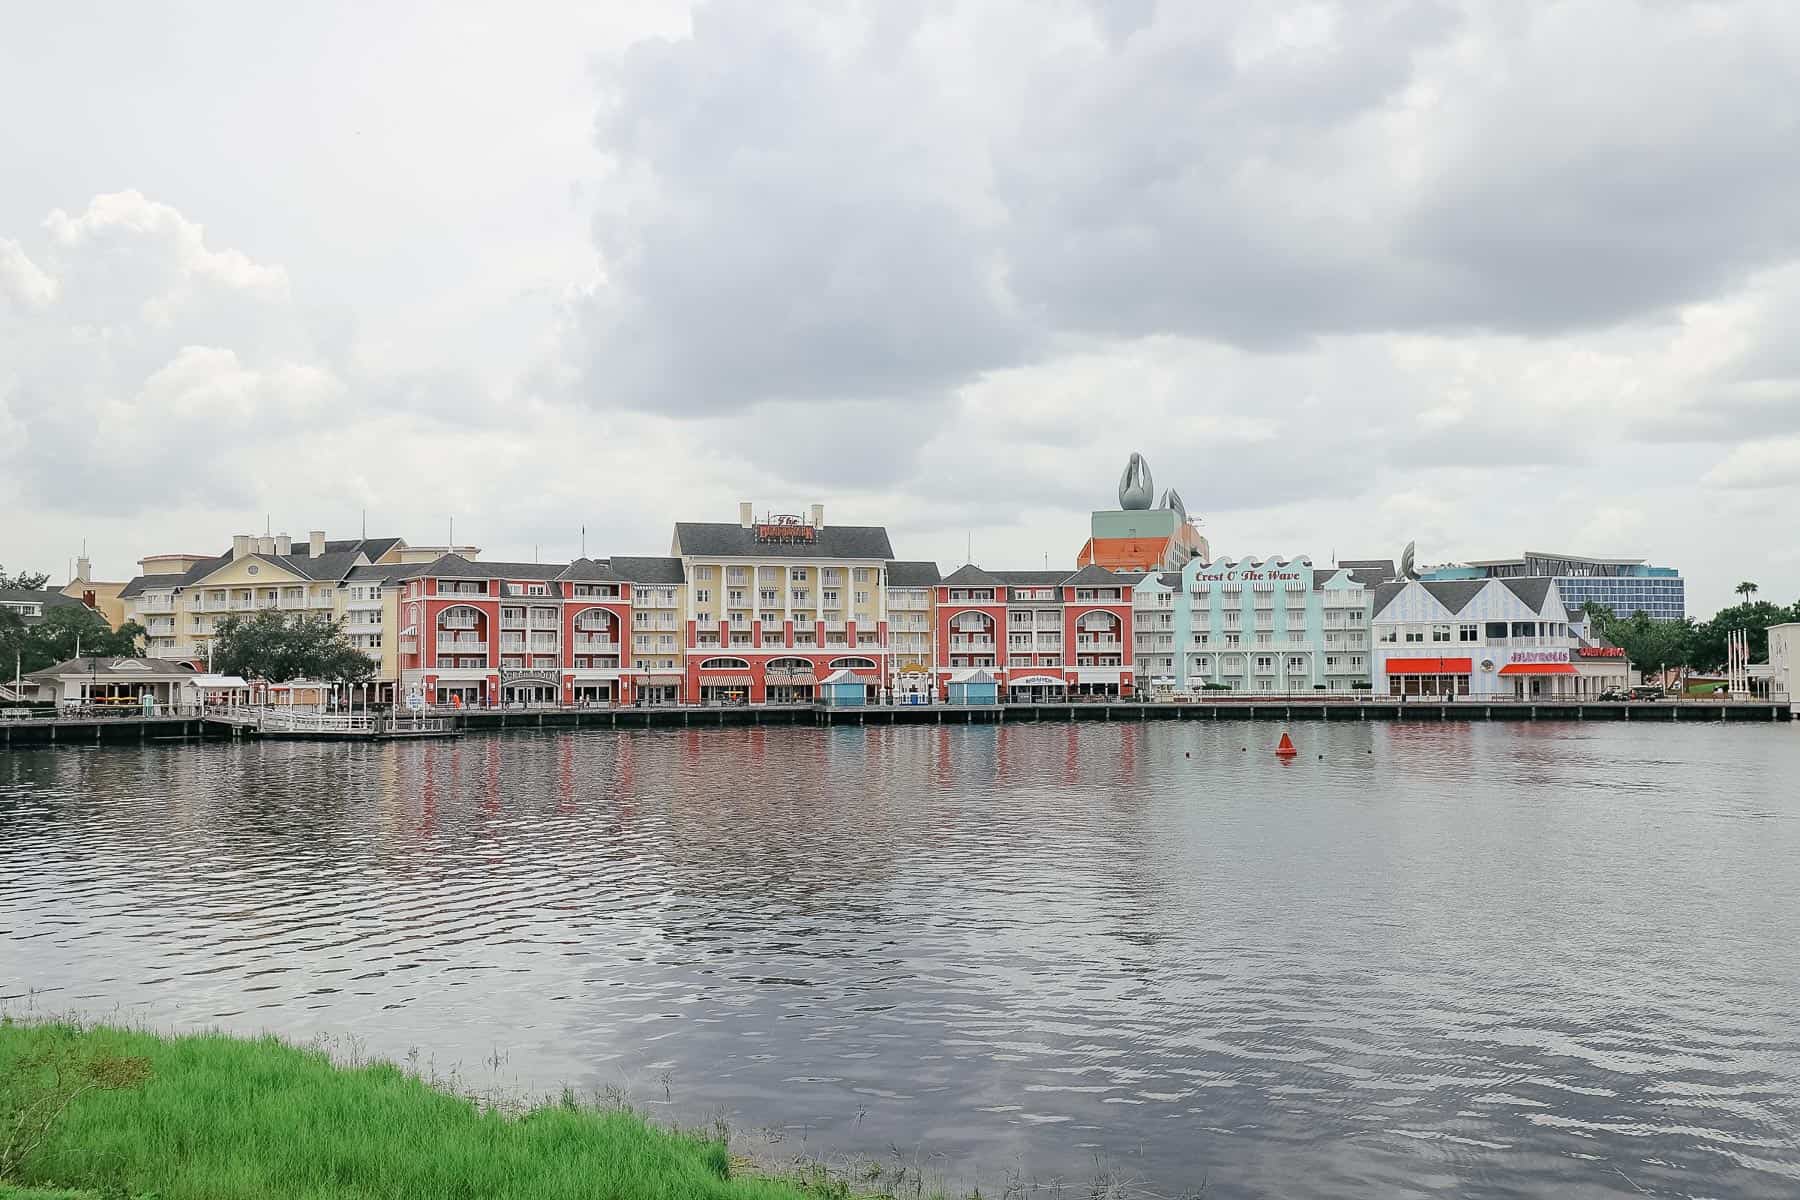 Disney's Boardwalk pops with colors on a cloudy day. 